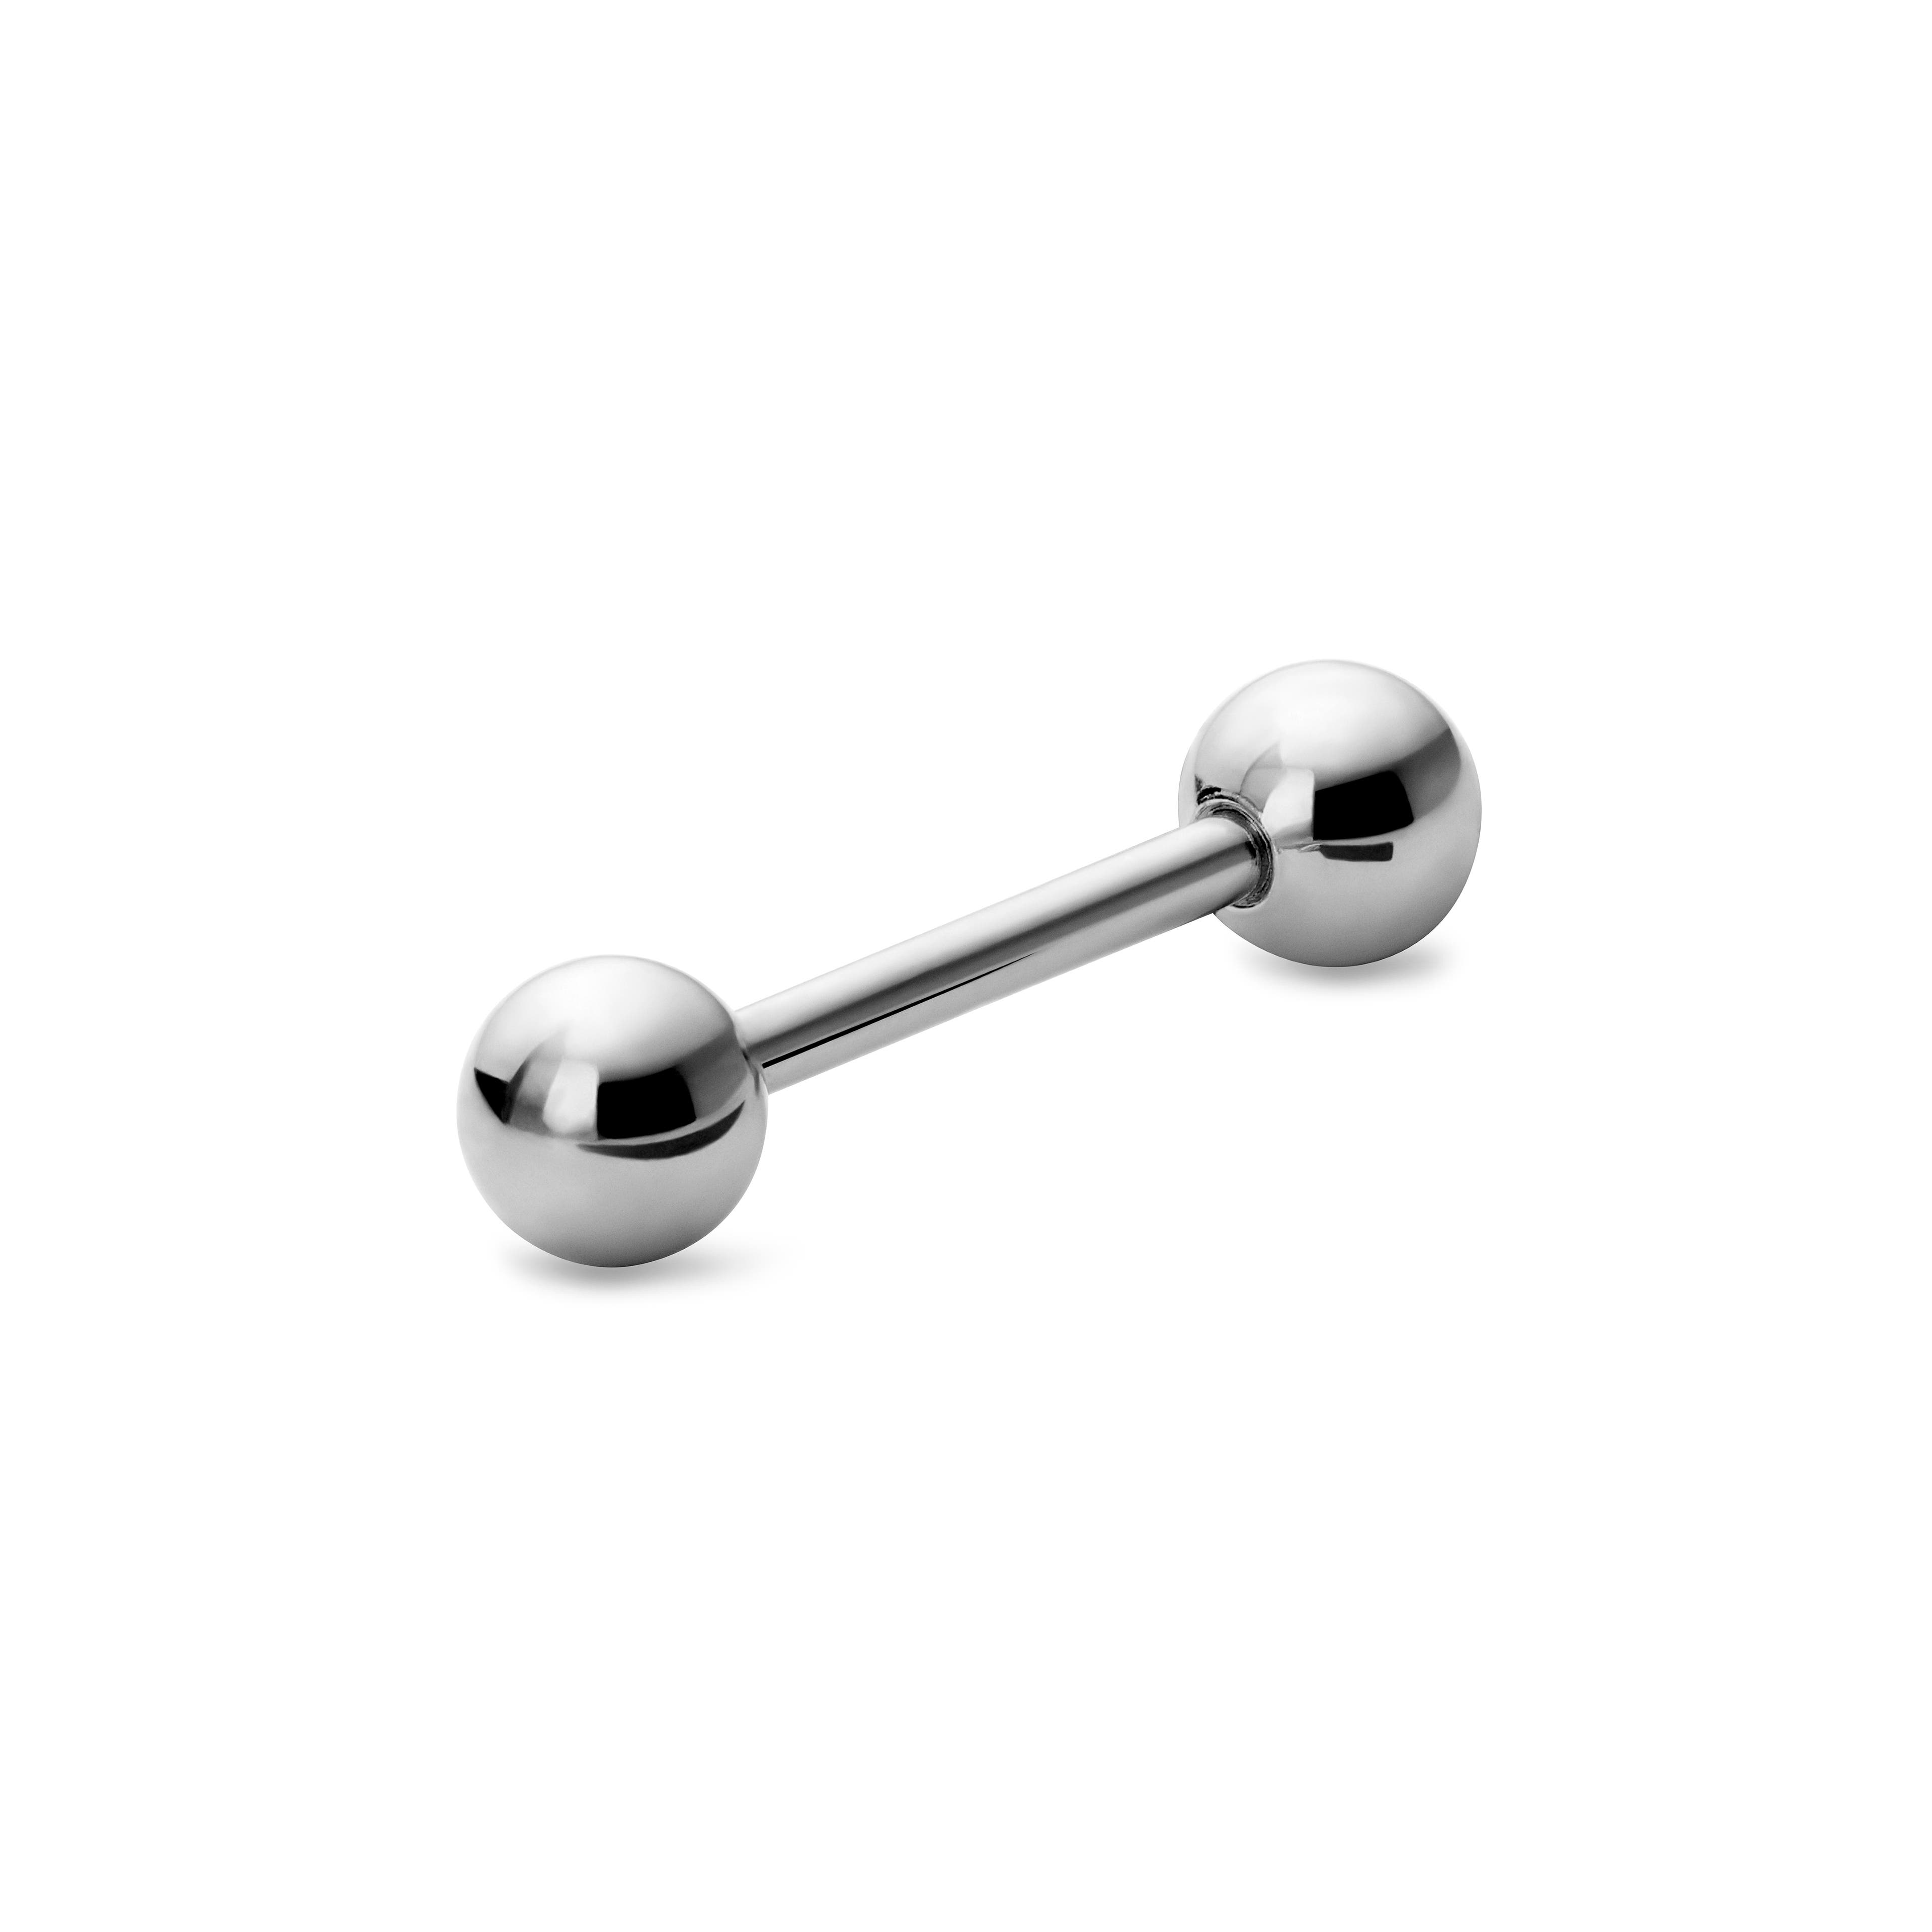 1/4" (6 mm) Silver-Tone Straight Ball-Tipped Titanium Barbell